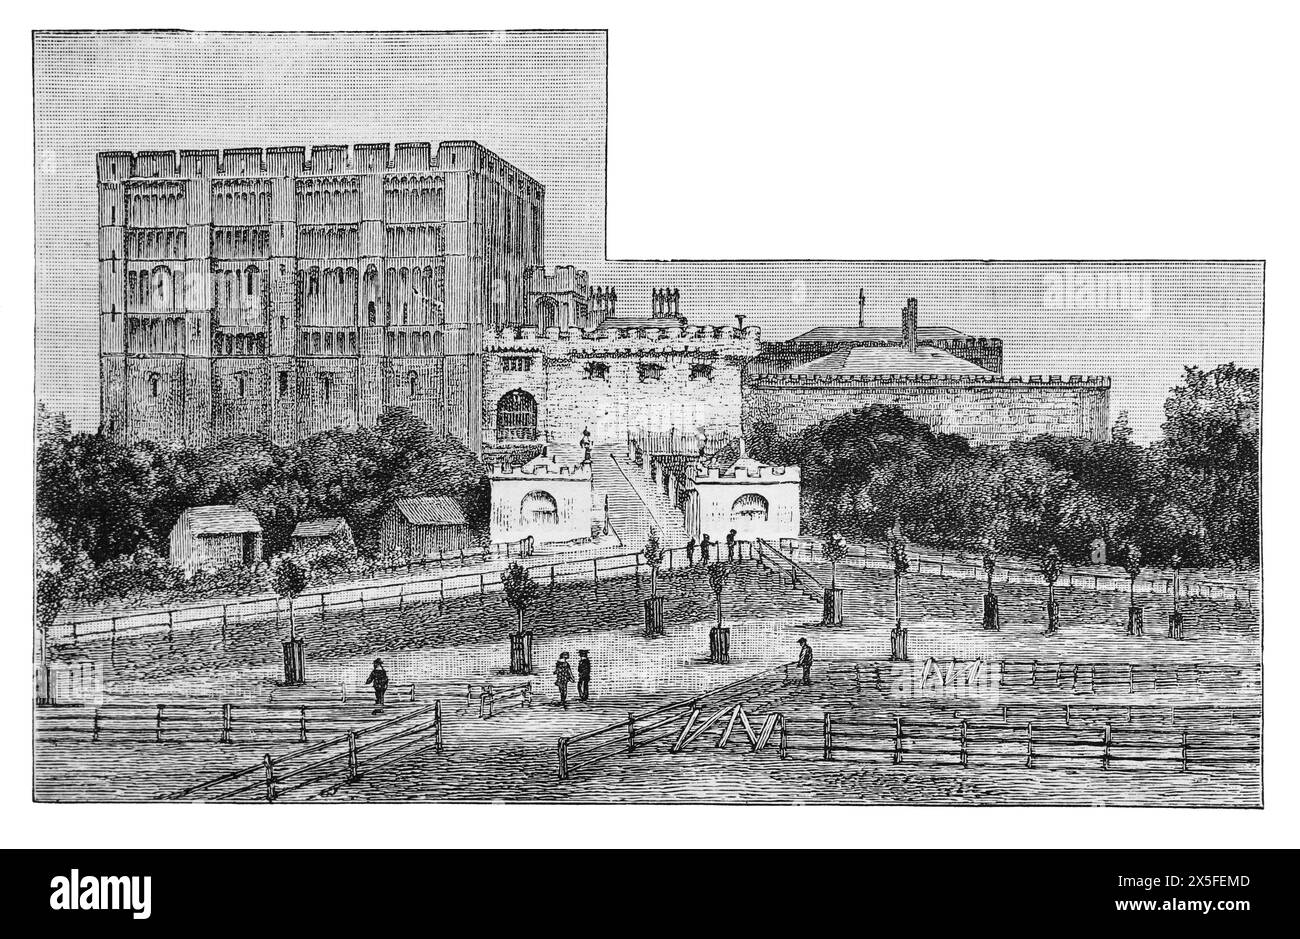 Norwich Castle as it would have appeared in the 19th century. Black and White Illustration from Our Own Country Vol III published by Cassell, Petter, Galpin & Co. in the late 19th century. Stock Photo